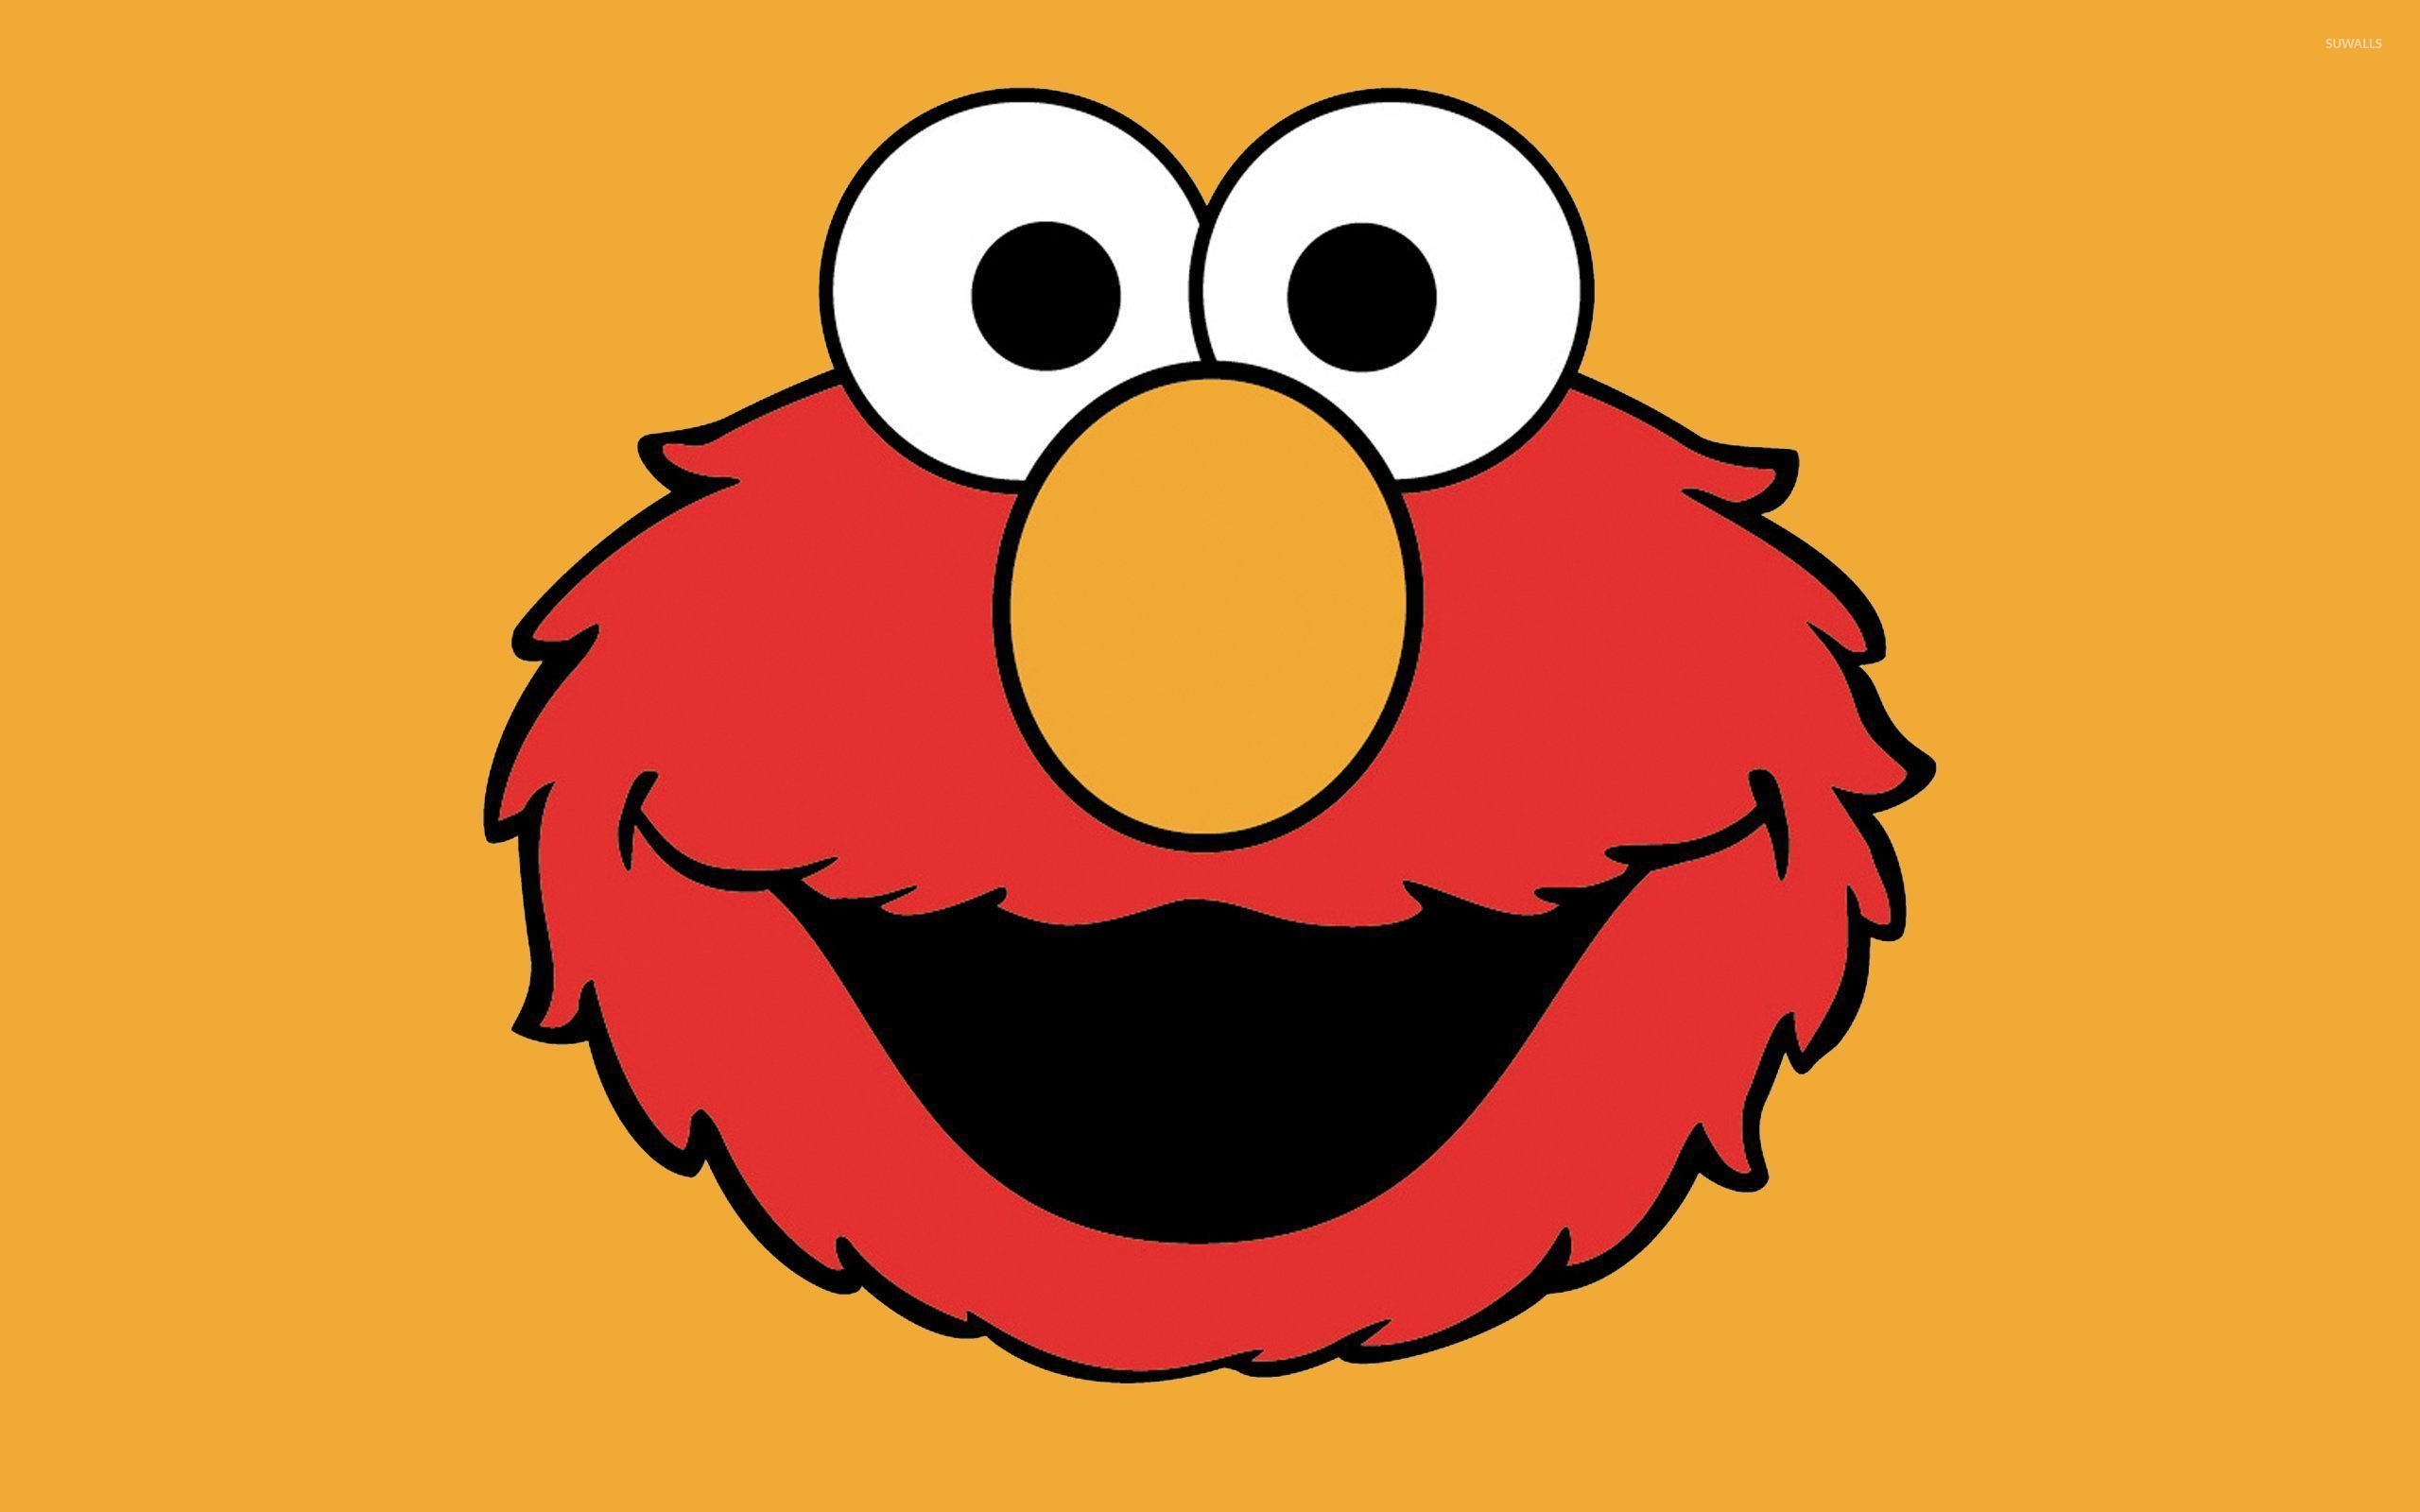 Elmo, HD wallpapers, Funny character, Screen quality image, 2560x1600 HD Desktop